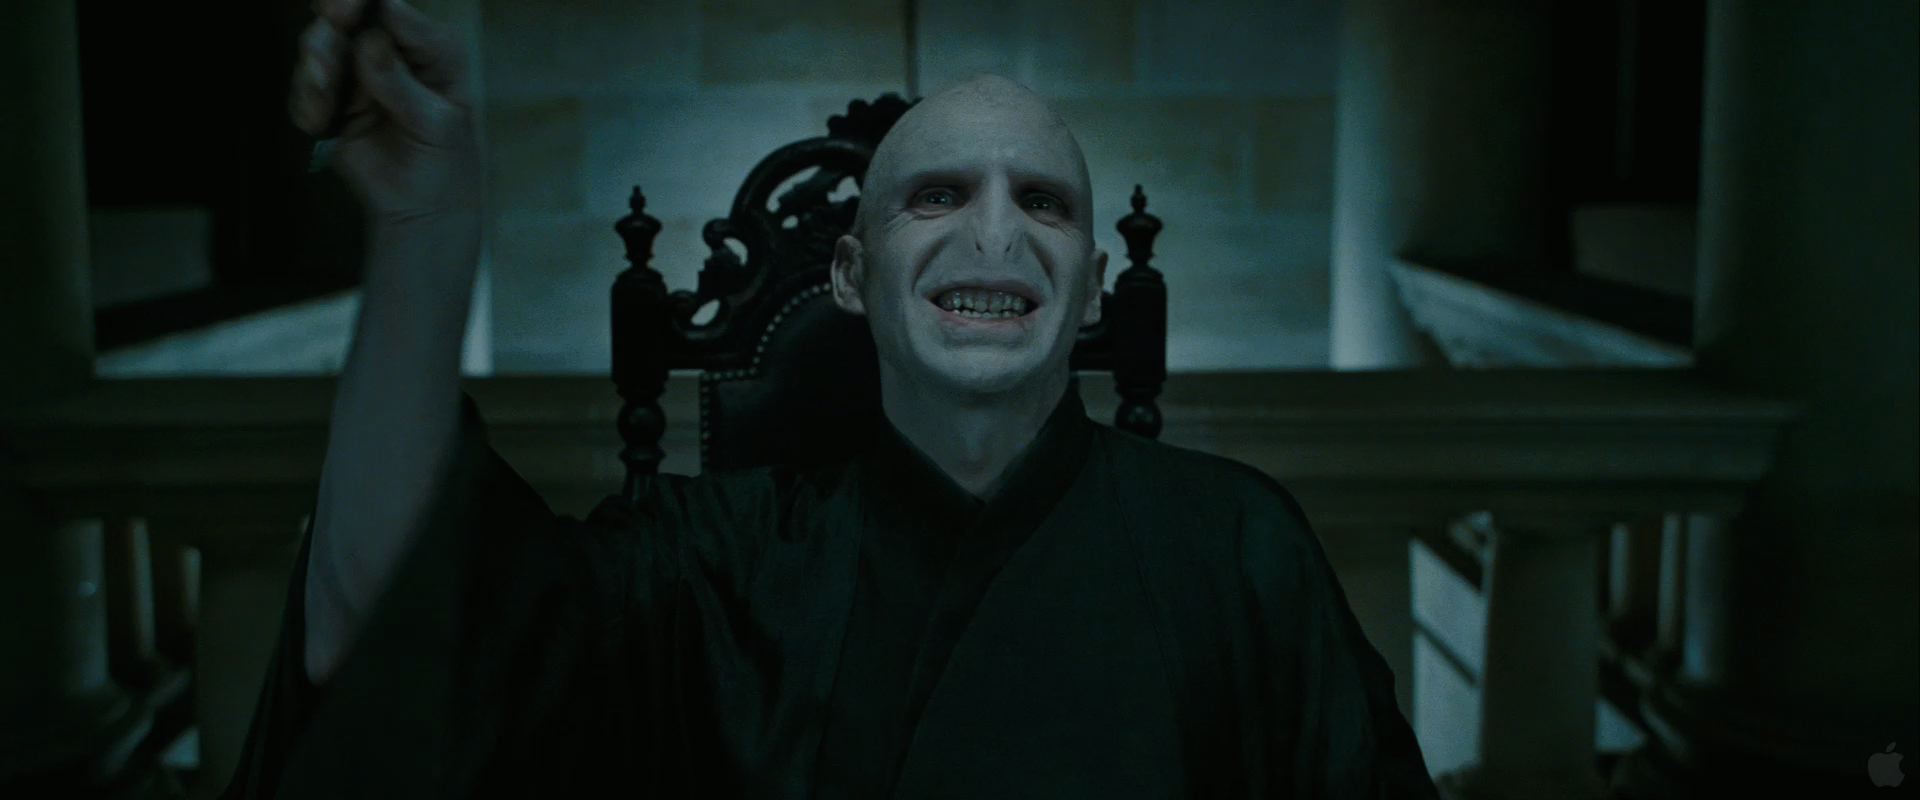 Voldemort From Harry Potter And The Deathly Hallows Desktop Wallpaper